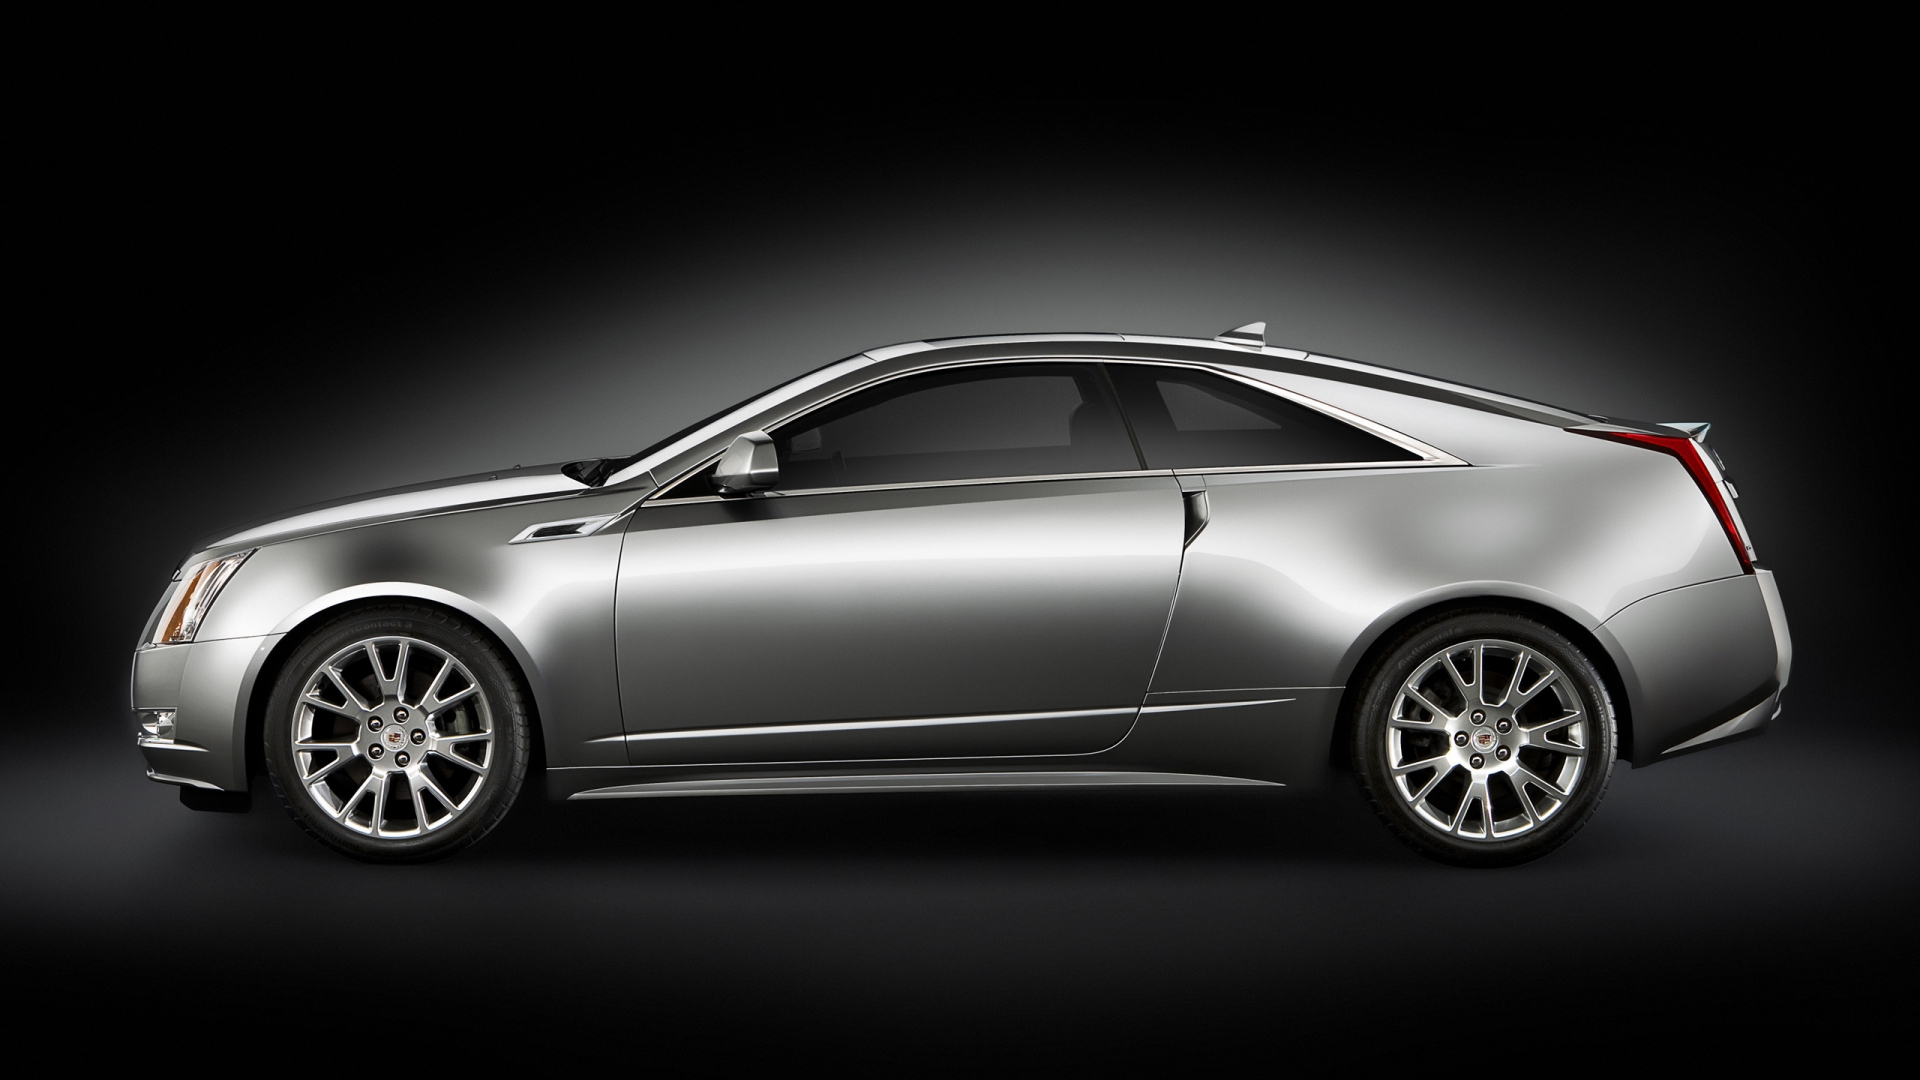 Cadillac CTS Coupe Side for 1920 x 1080 HDTV 1080p resolution